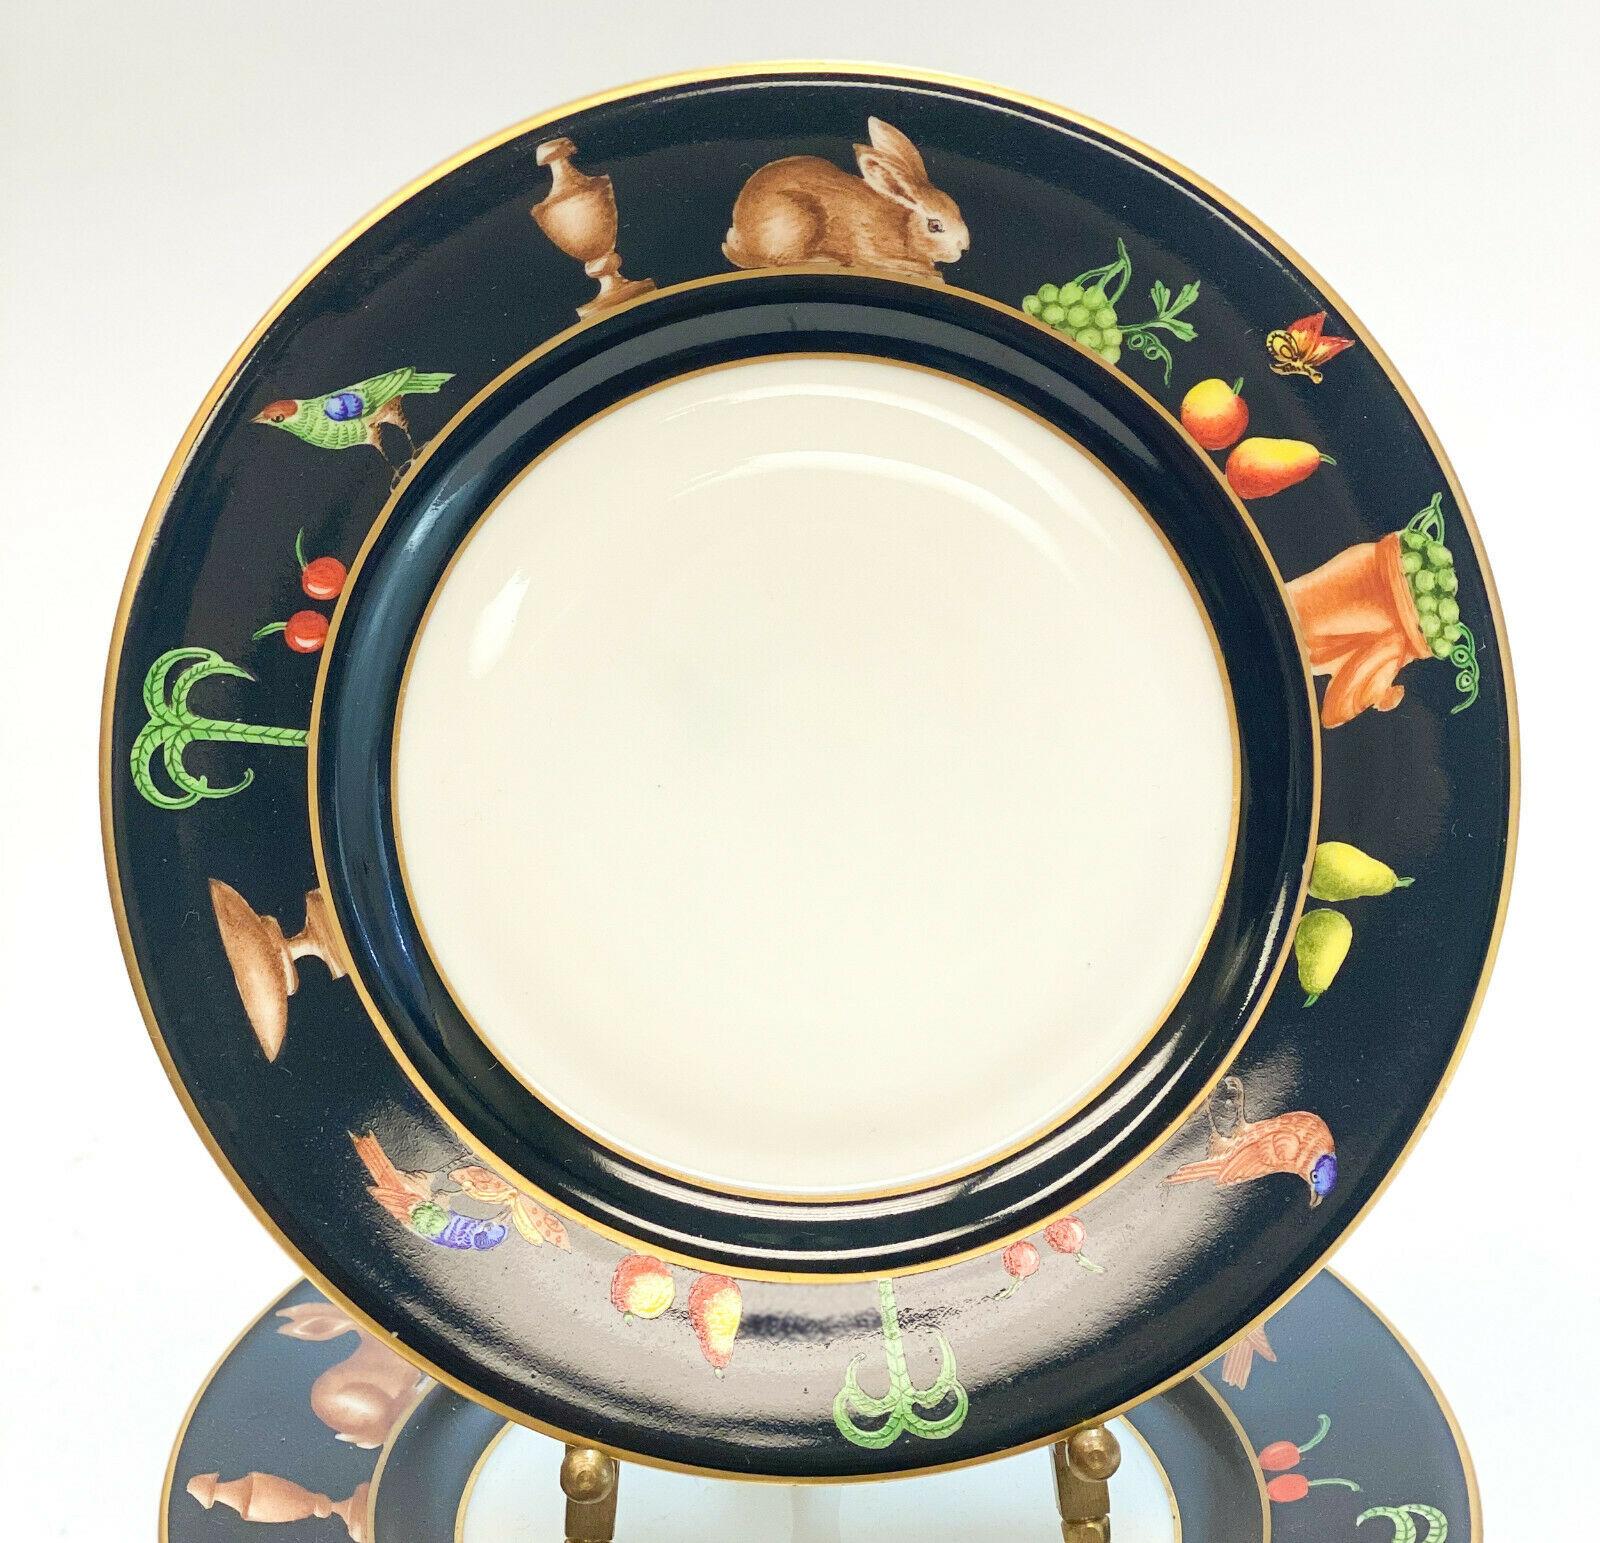 6 Tiffany Private Stock Le Tallec Porcelain Decorative Saucers Black Shoulder In Excellent Condition For Sale In Pasadena, CA